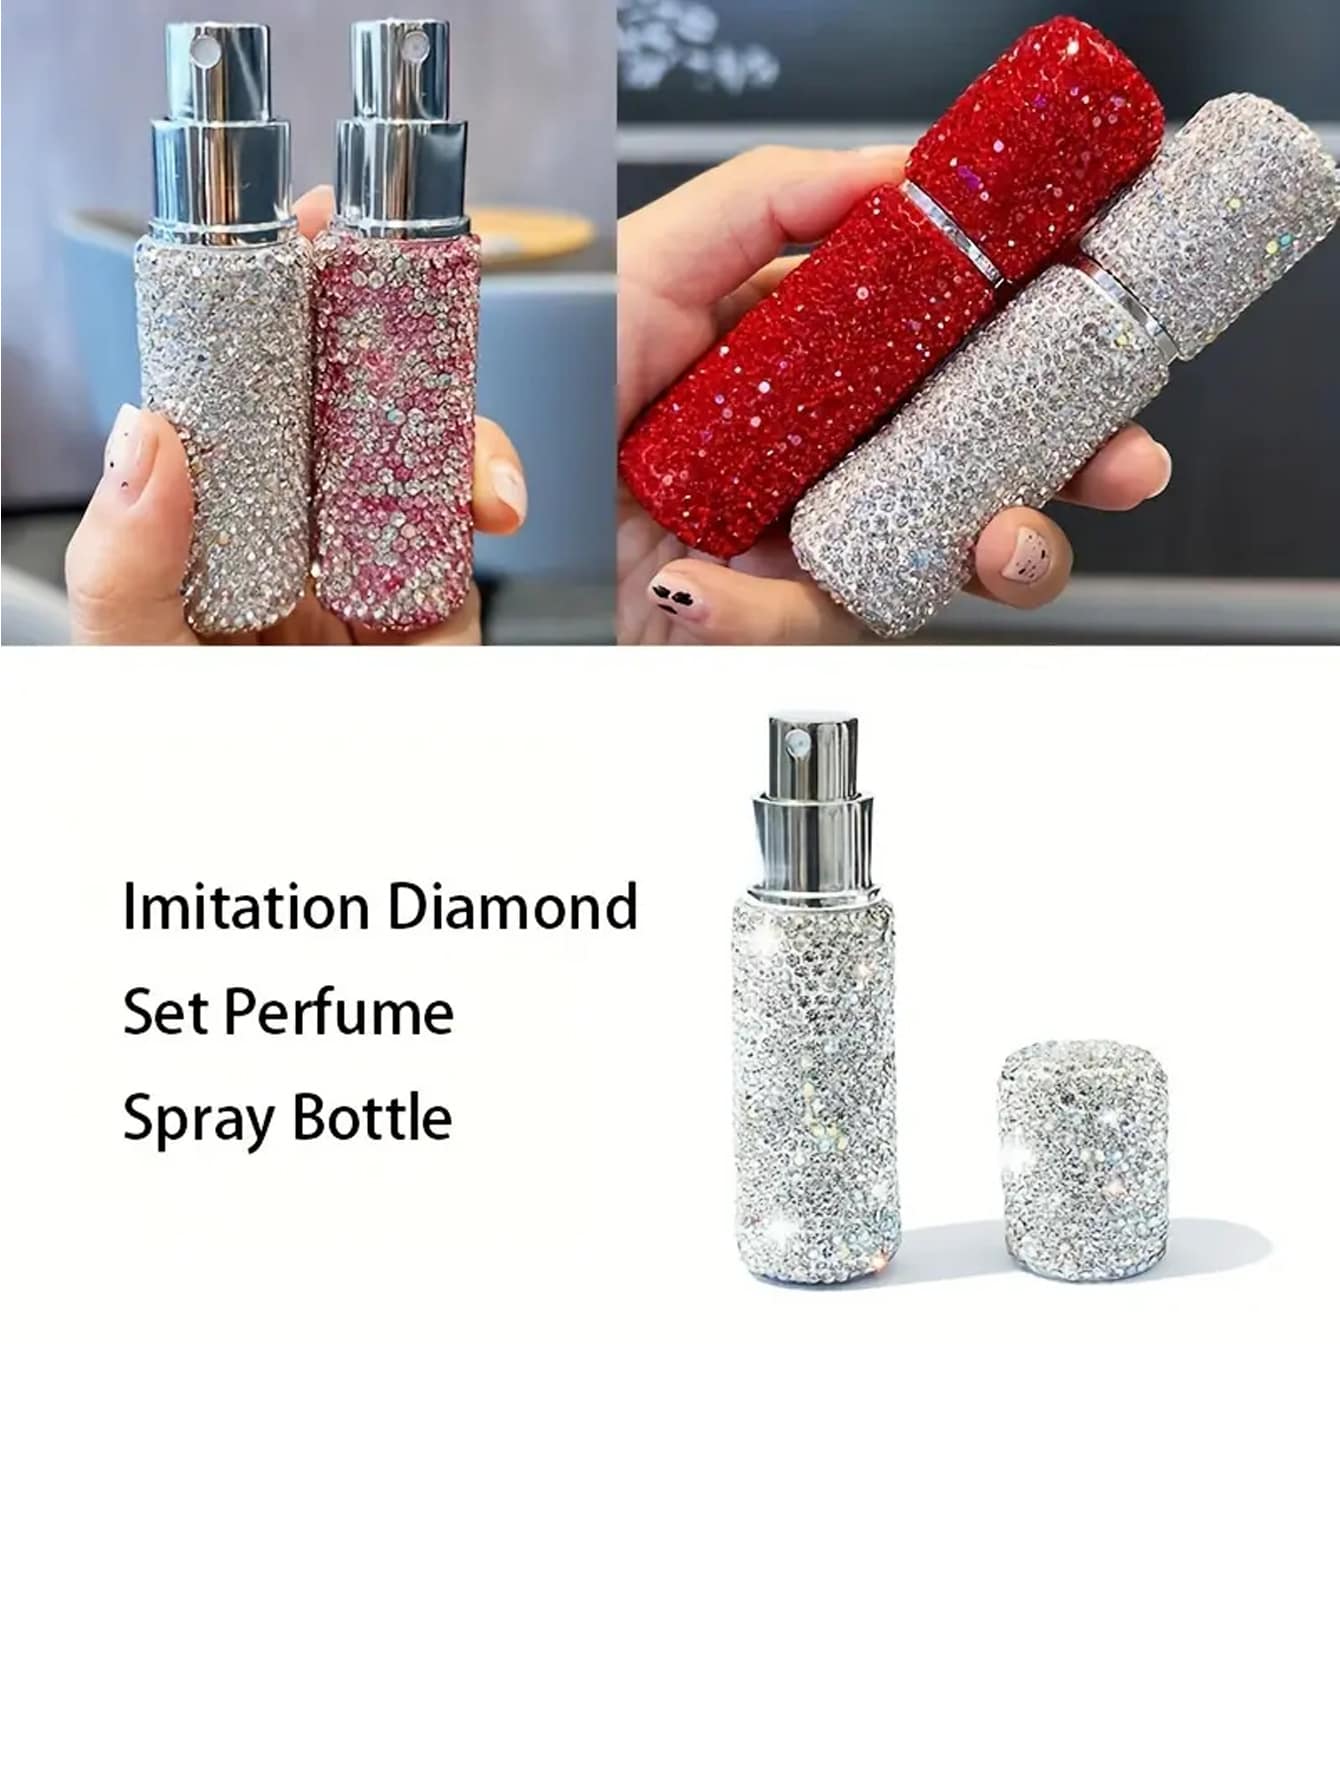 10ml Portable Vacuum Press Bottle For Perfume Refill, Spray Bottle With Fine Mist Sprayer, Diamond Decorated, Ideal For Travel, Makeup And Skincare-Multicolor-3